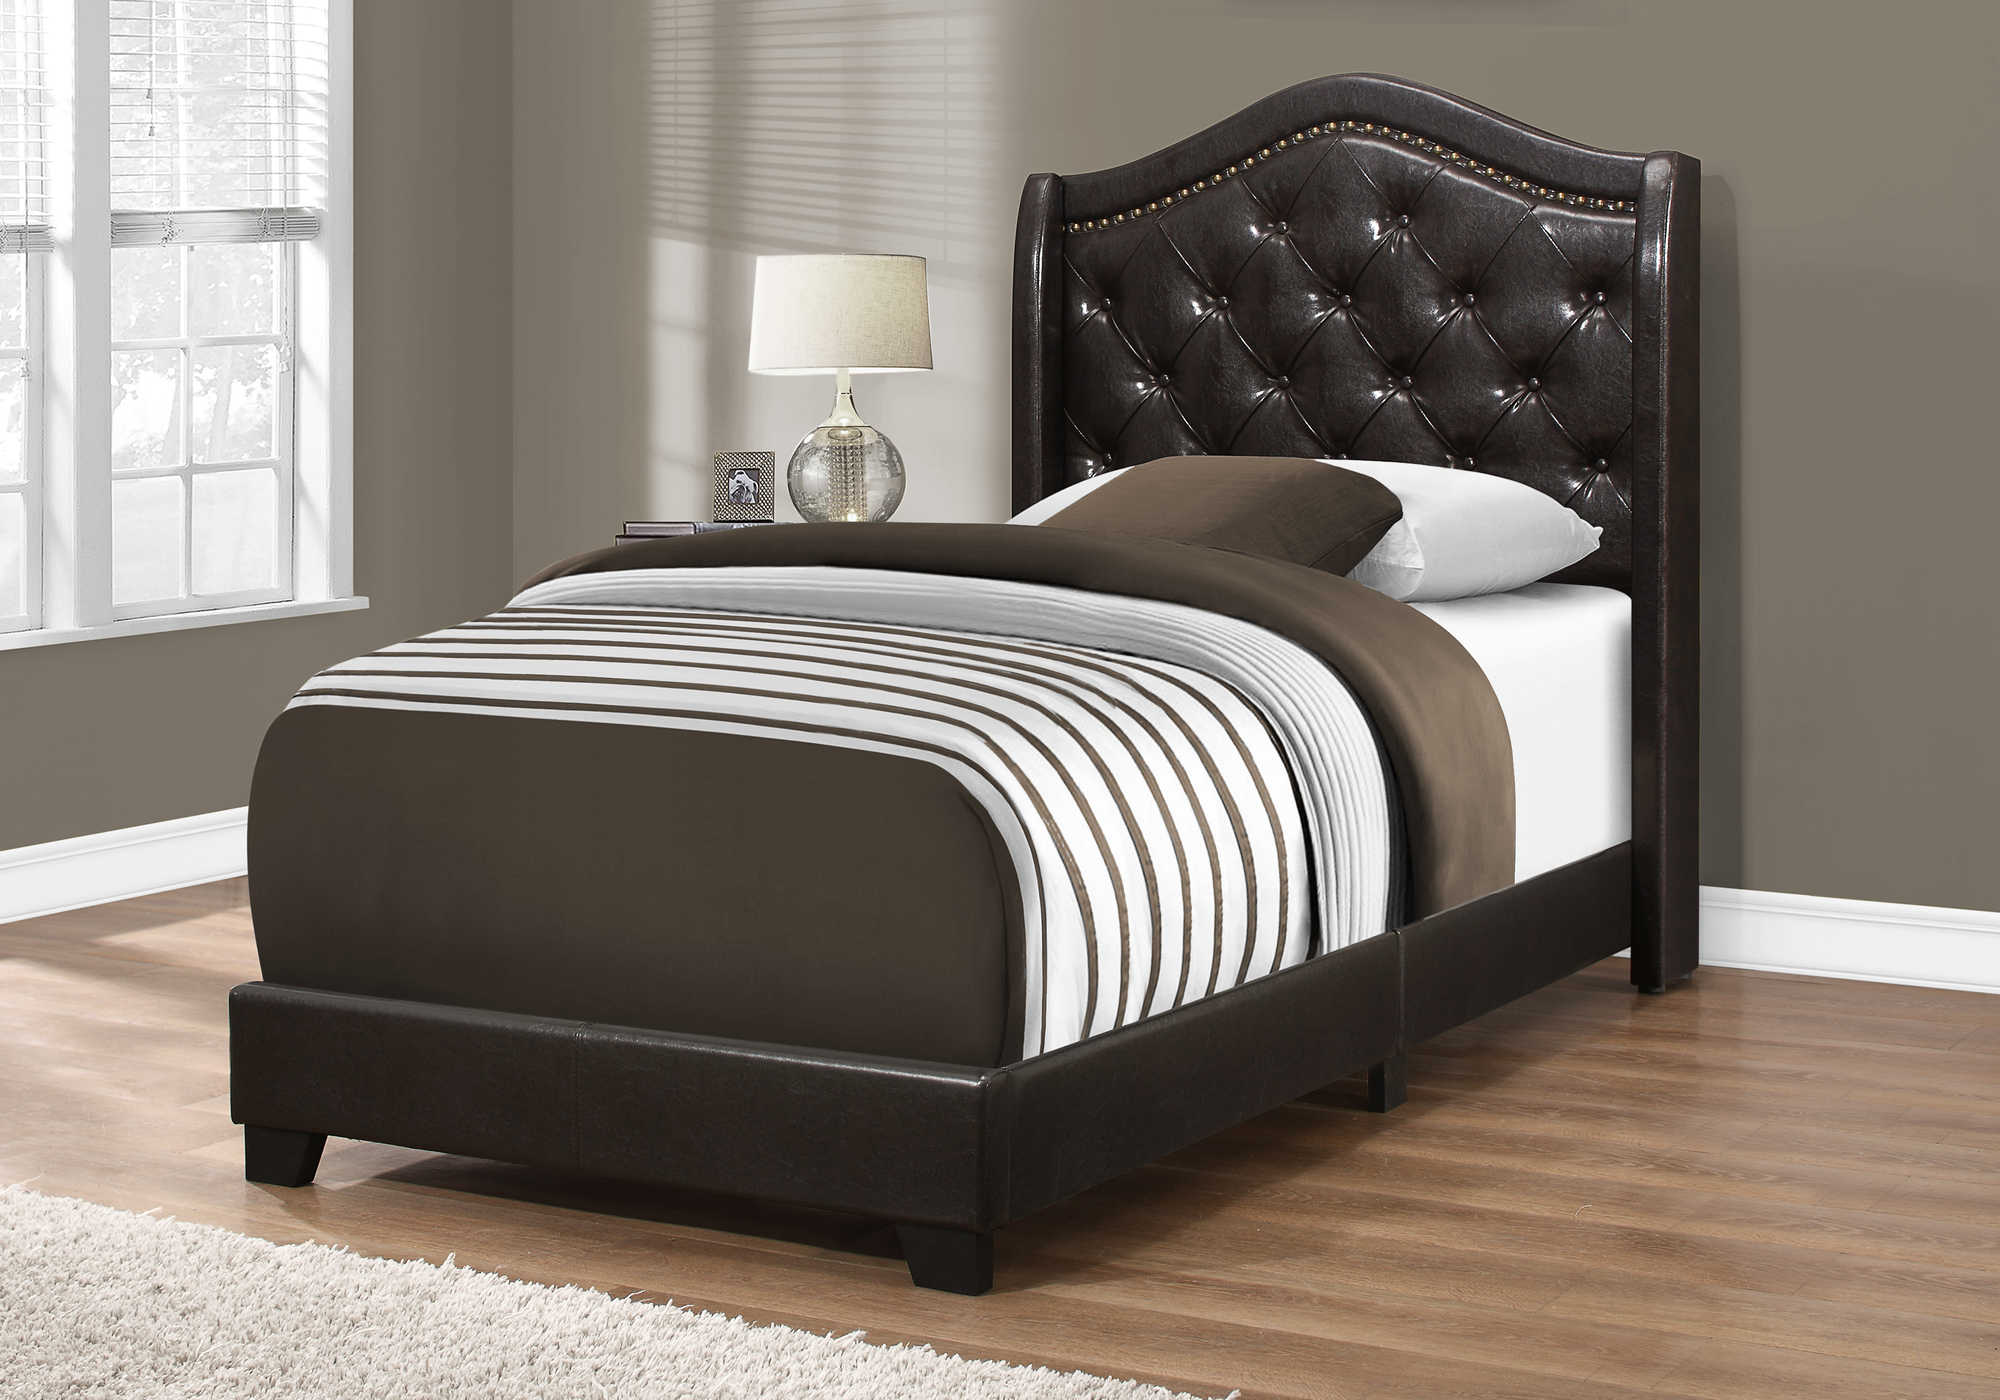 BED - TWIN SIZE / BROWN LEATHER-LOOK WITH BRASS TRIM